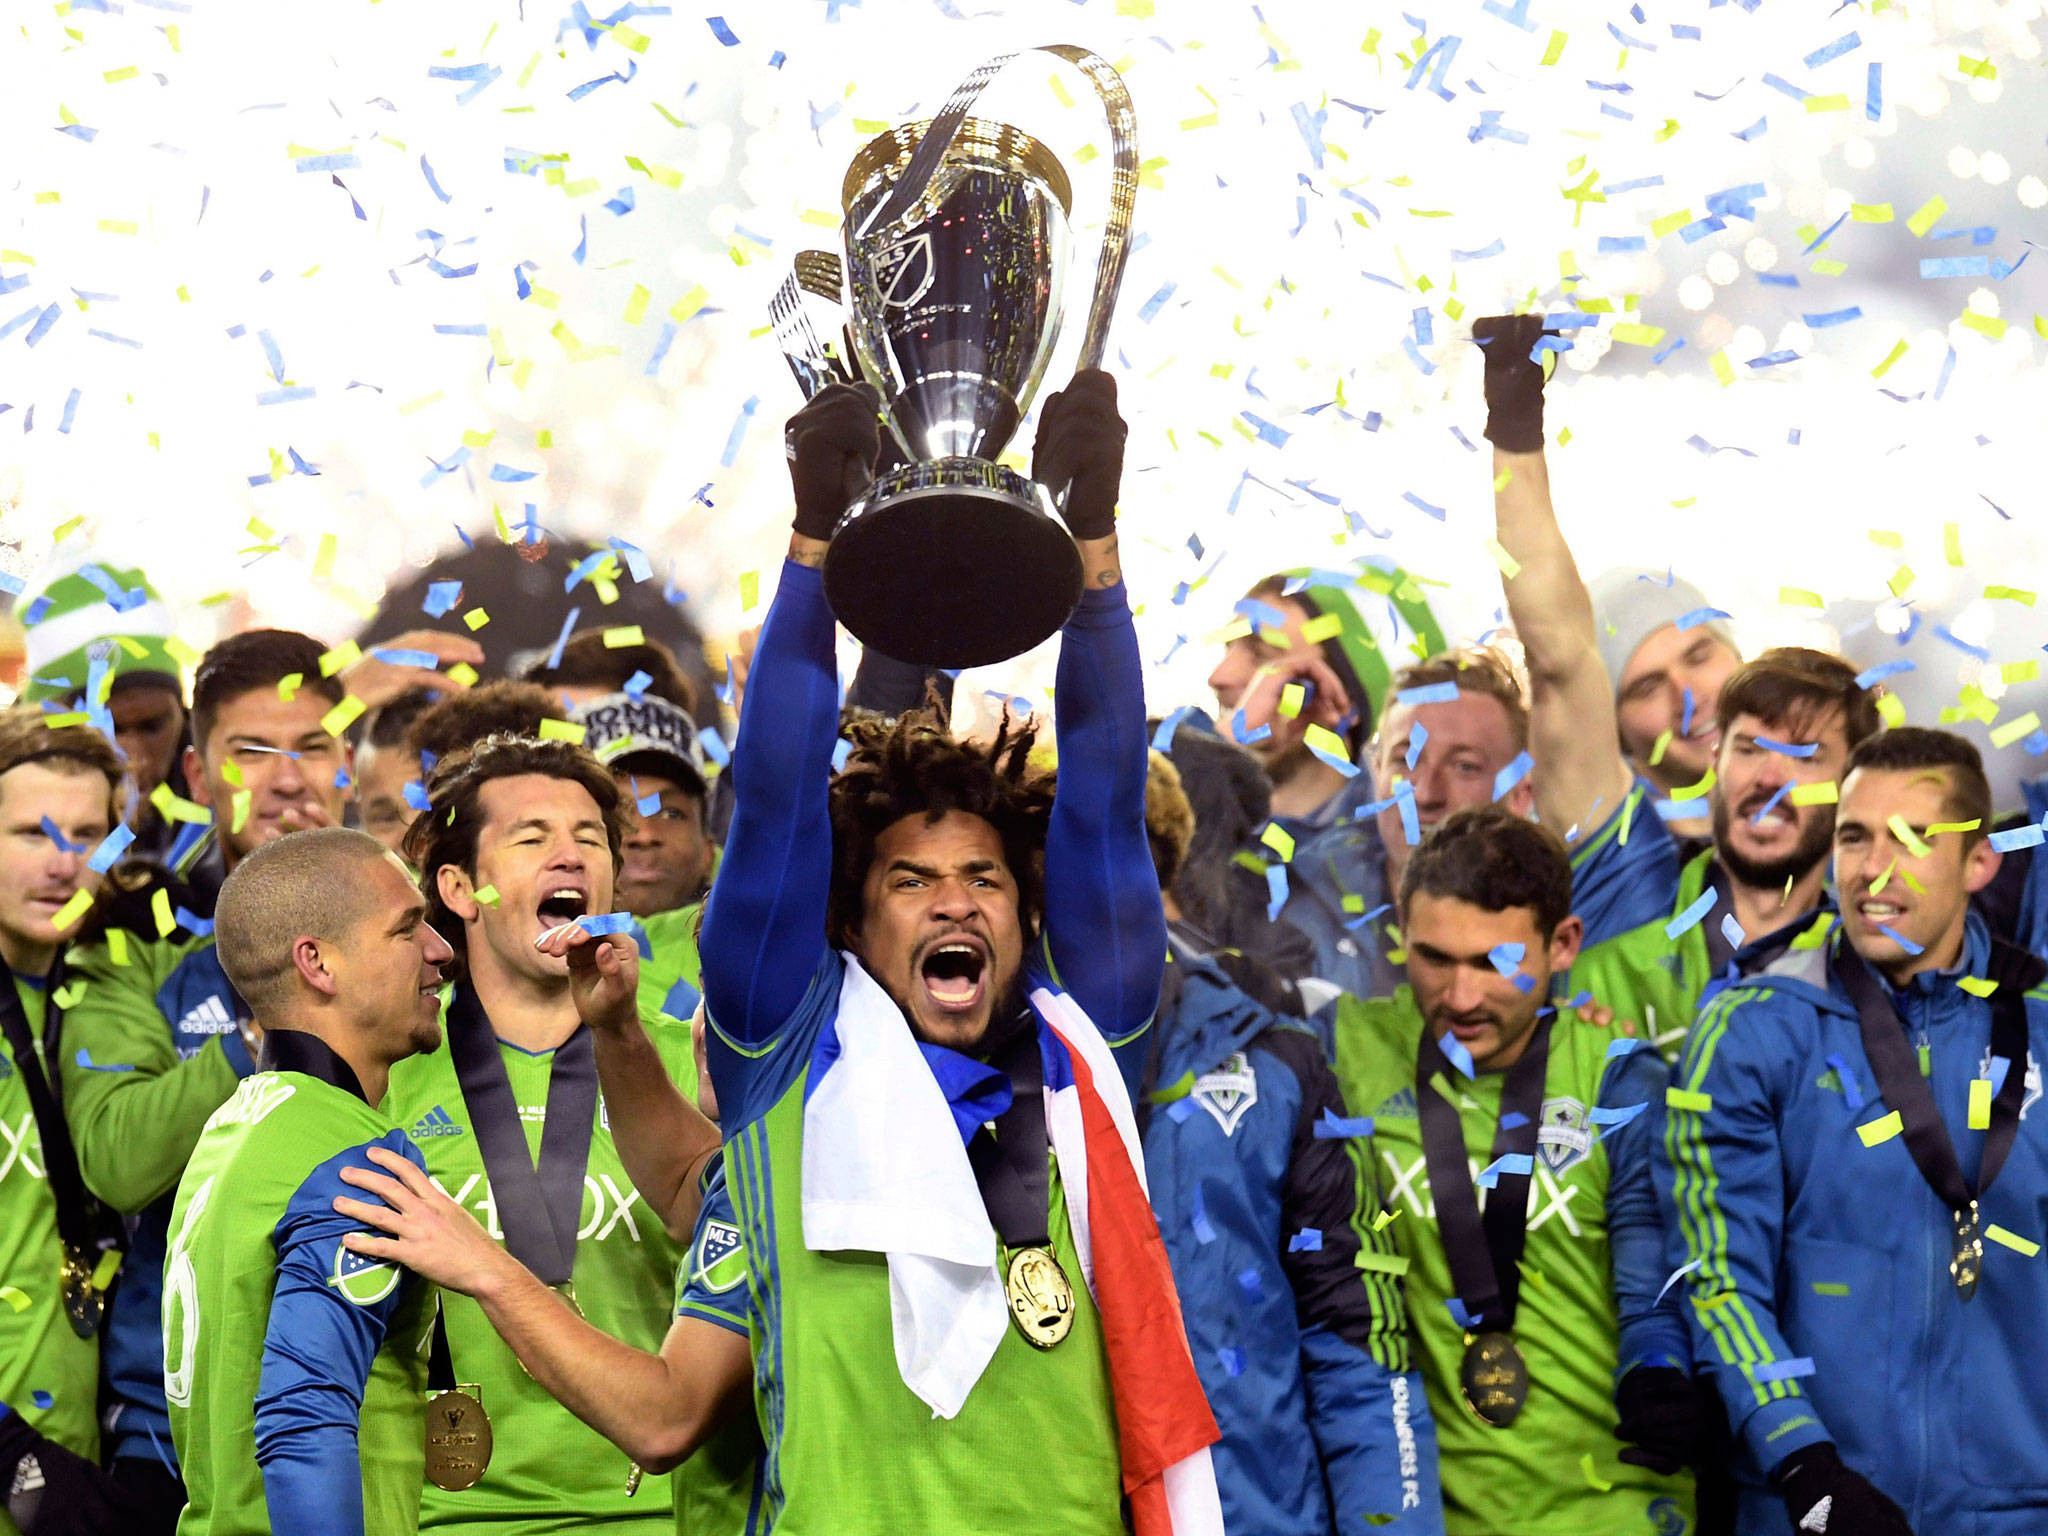 Seattle Sounders FC will be looking to defend its MLS Cup championship when the playoffs begin Nov. 21. (Frank Gunn/The Canadian Press via AP)